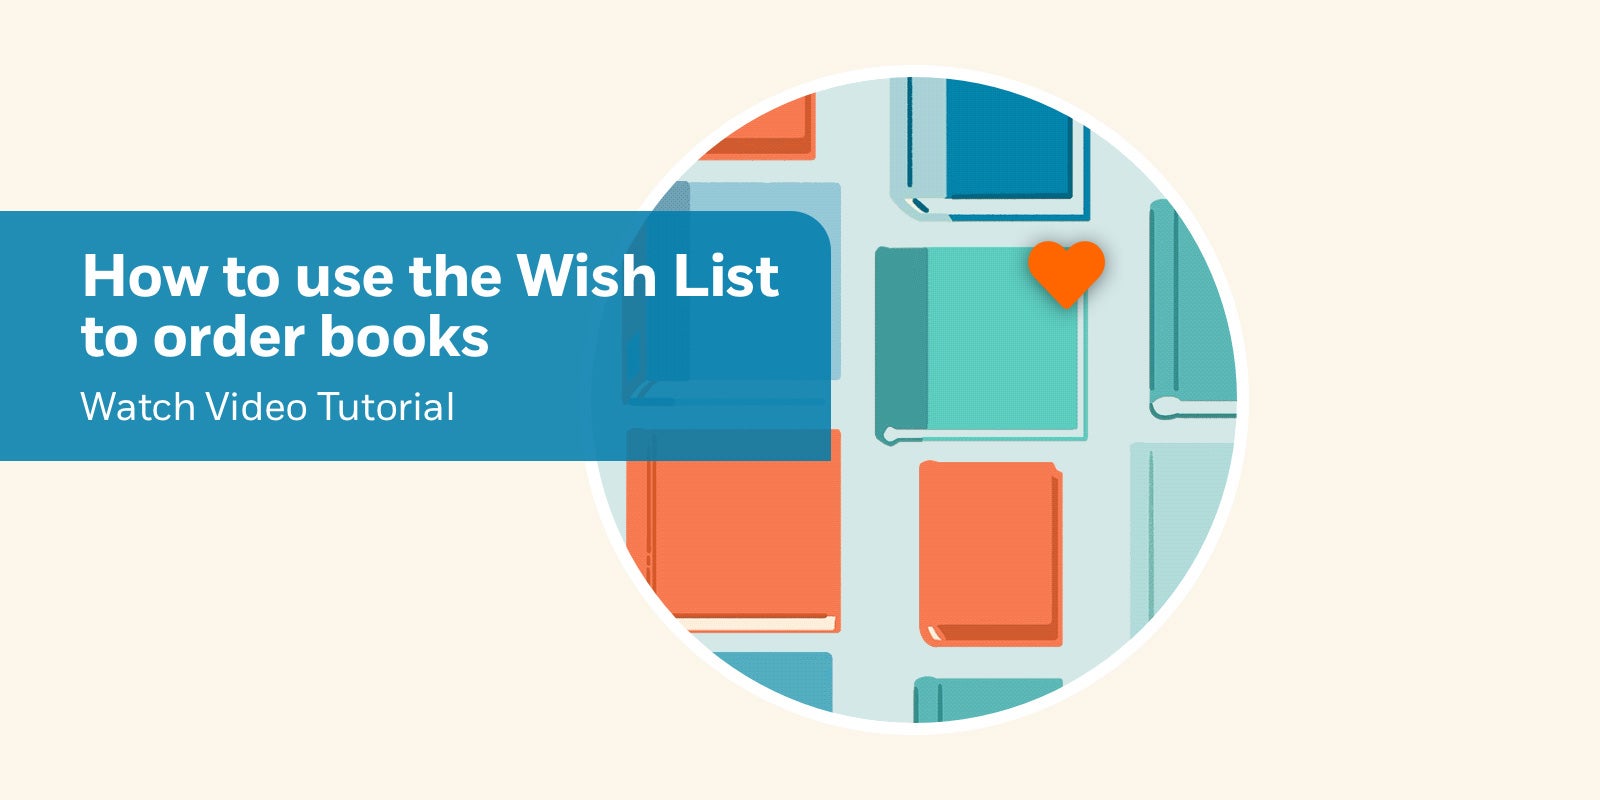 How to Use the Wish List to Order Books